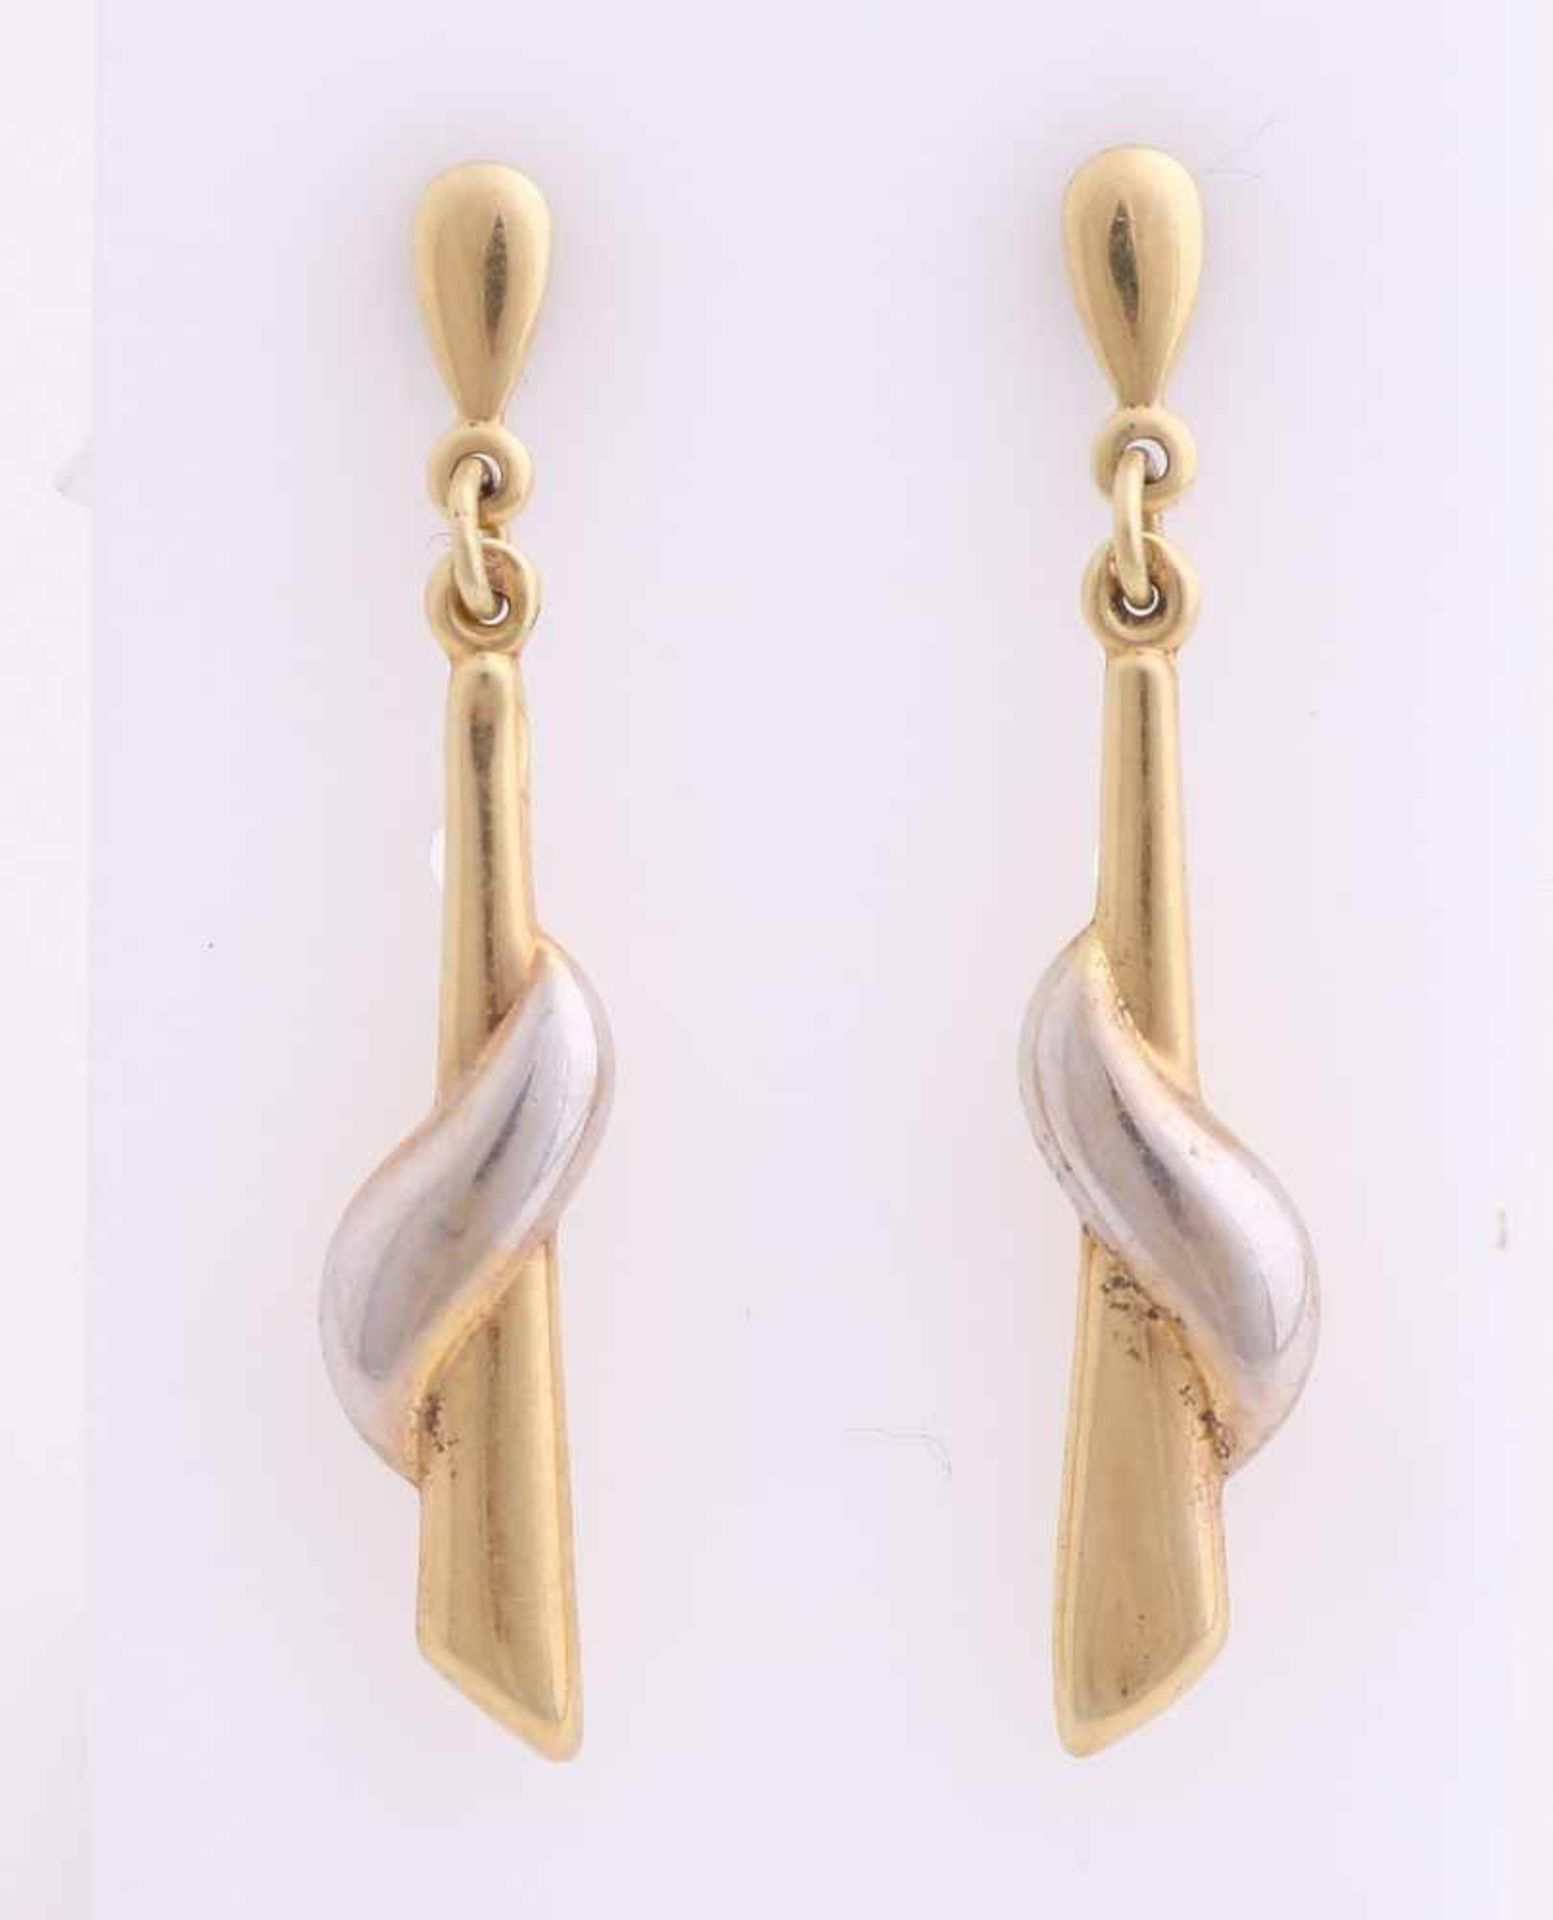 Yellow gold earrings, 585/000, having elongated hangers with white gold element. Length 38 mm. ca